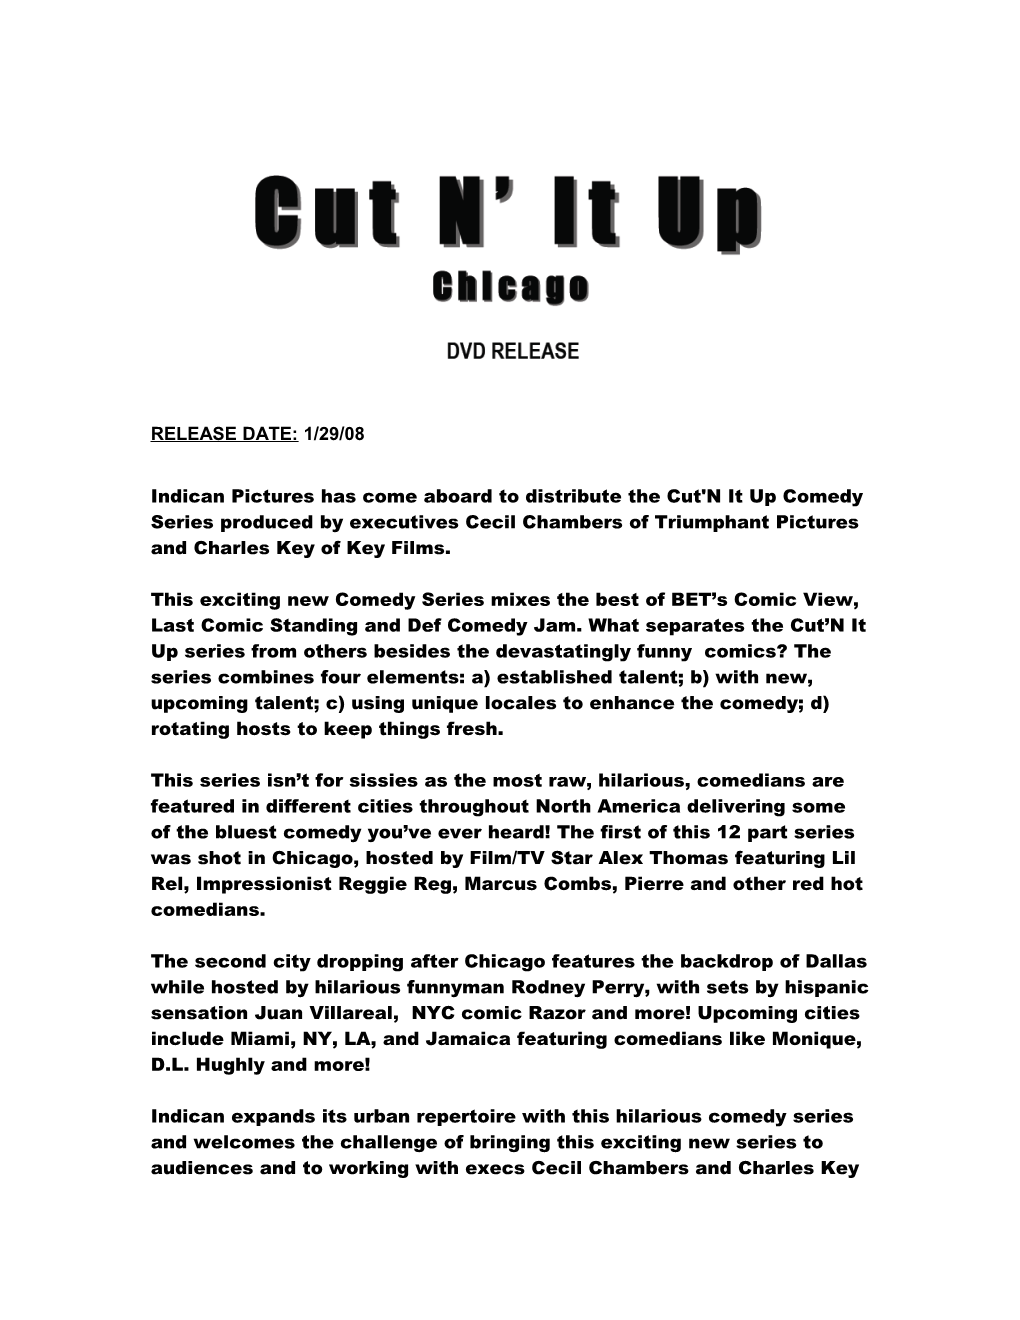 Indican Pictures Has Come Aboard to Distribute the Cut'n It up Comedy Series Produced By